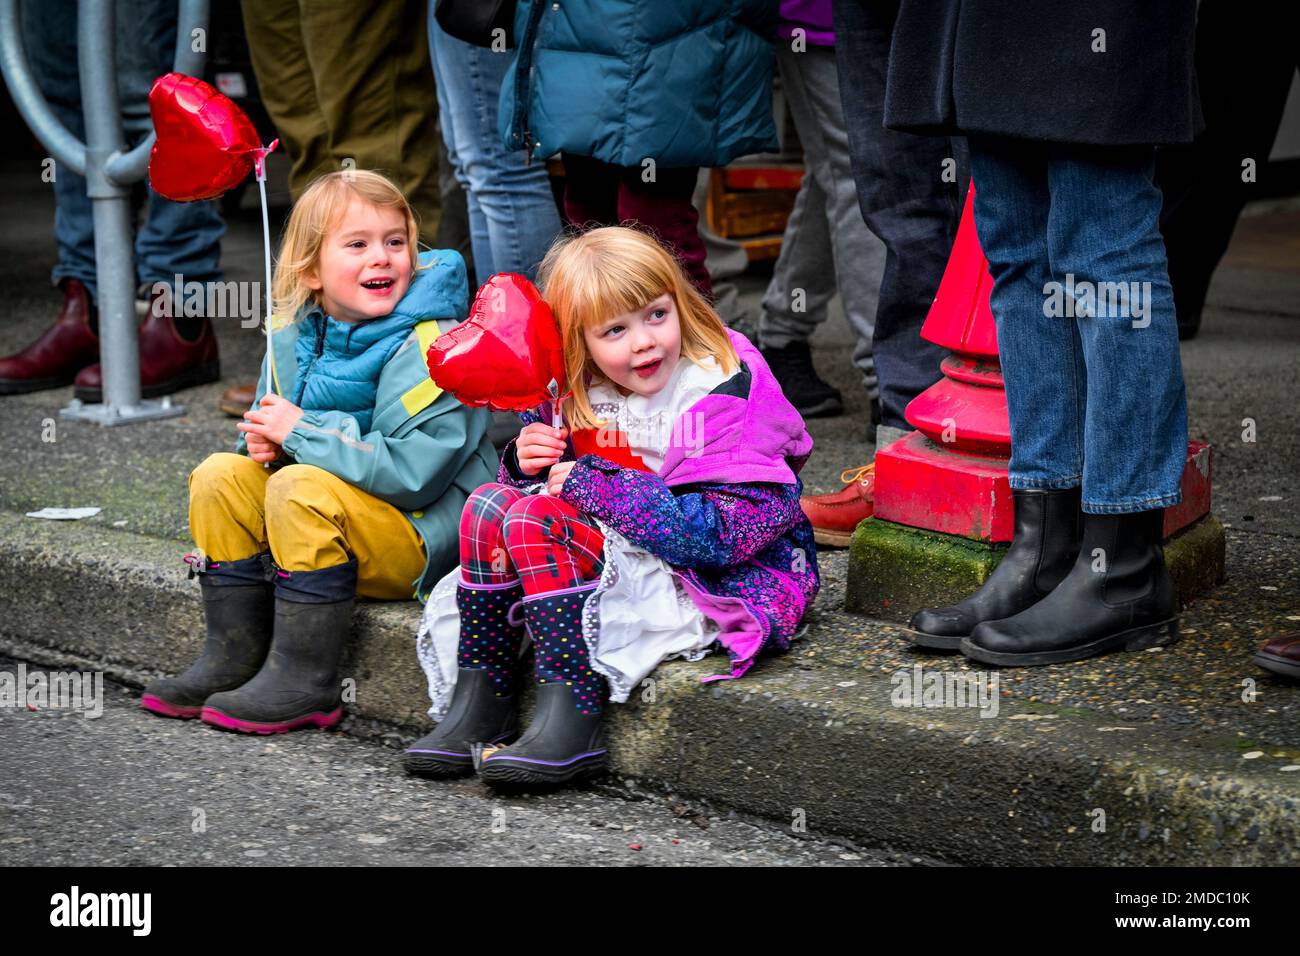 Young girls enjoy watching Chinese Lunar New Year Parade, Chinatown, Vancouver, British Columbia, Canada Stock Photo